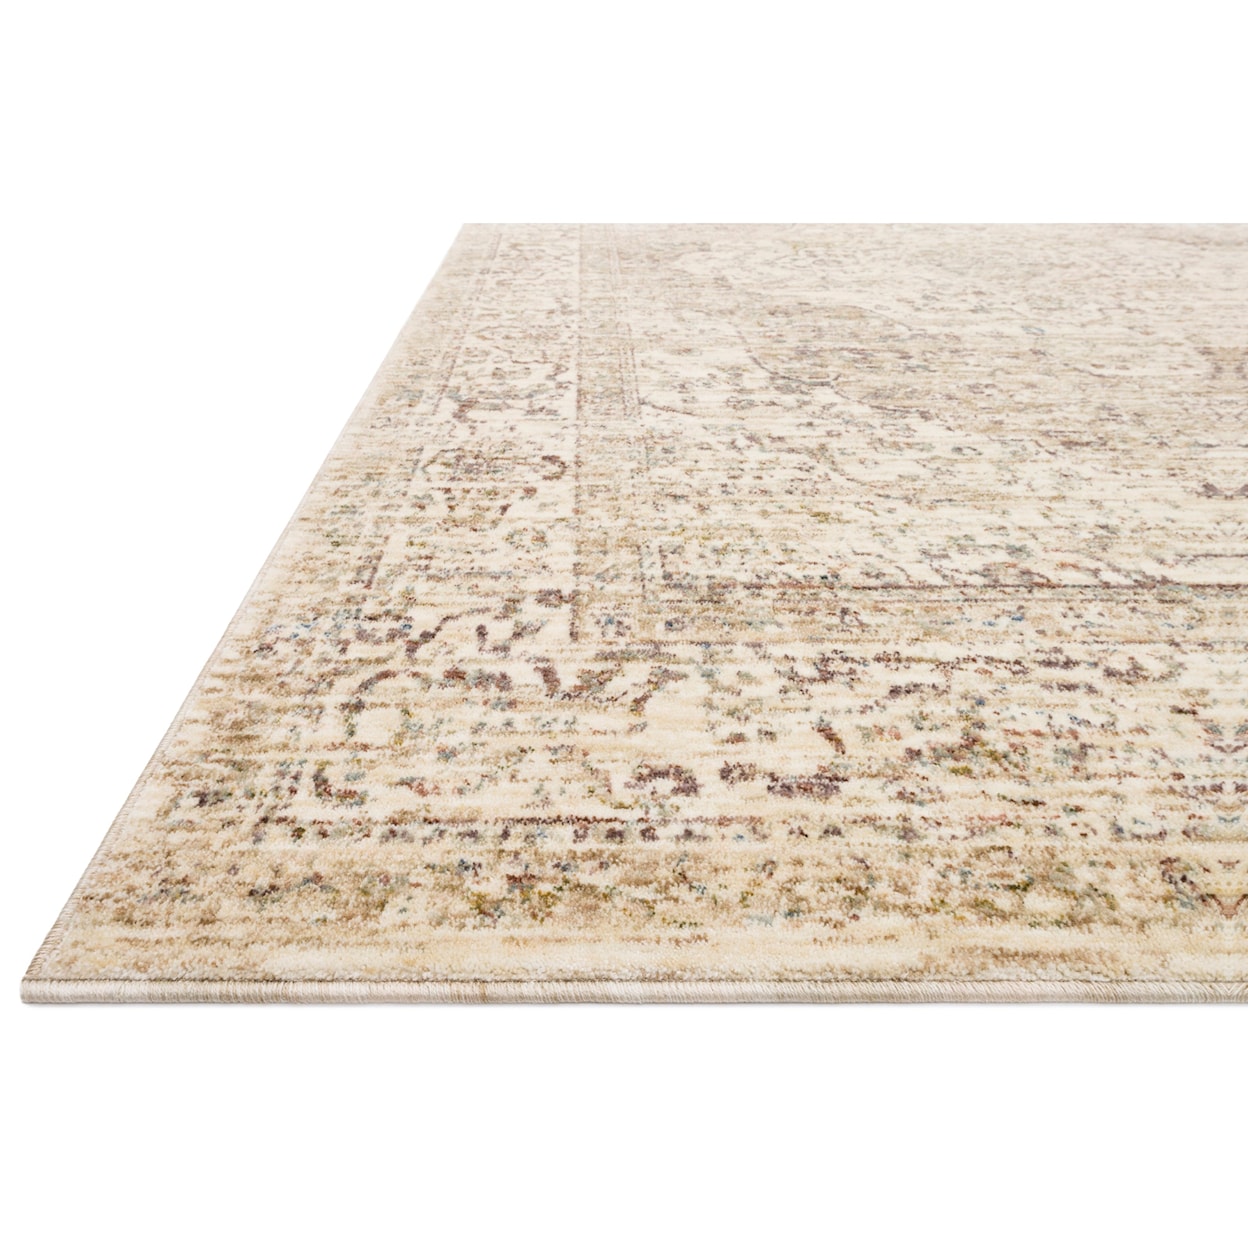 Reeds Rugs Revere 11'6" x 15'6" Ivory / Berry Rug